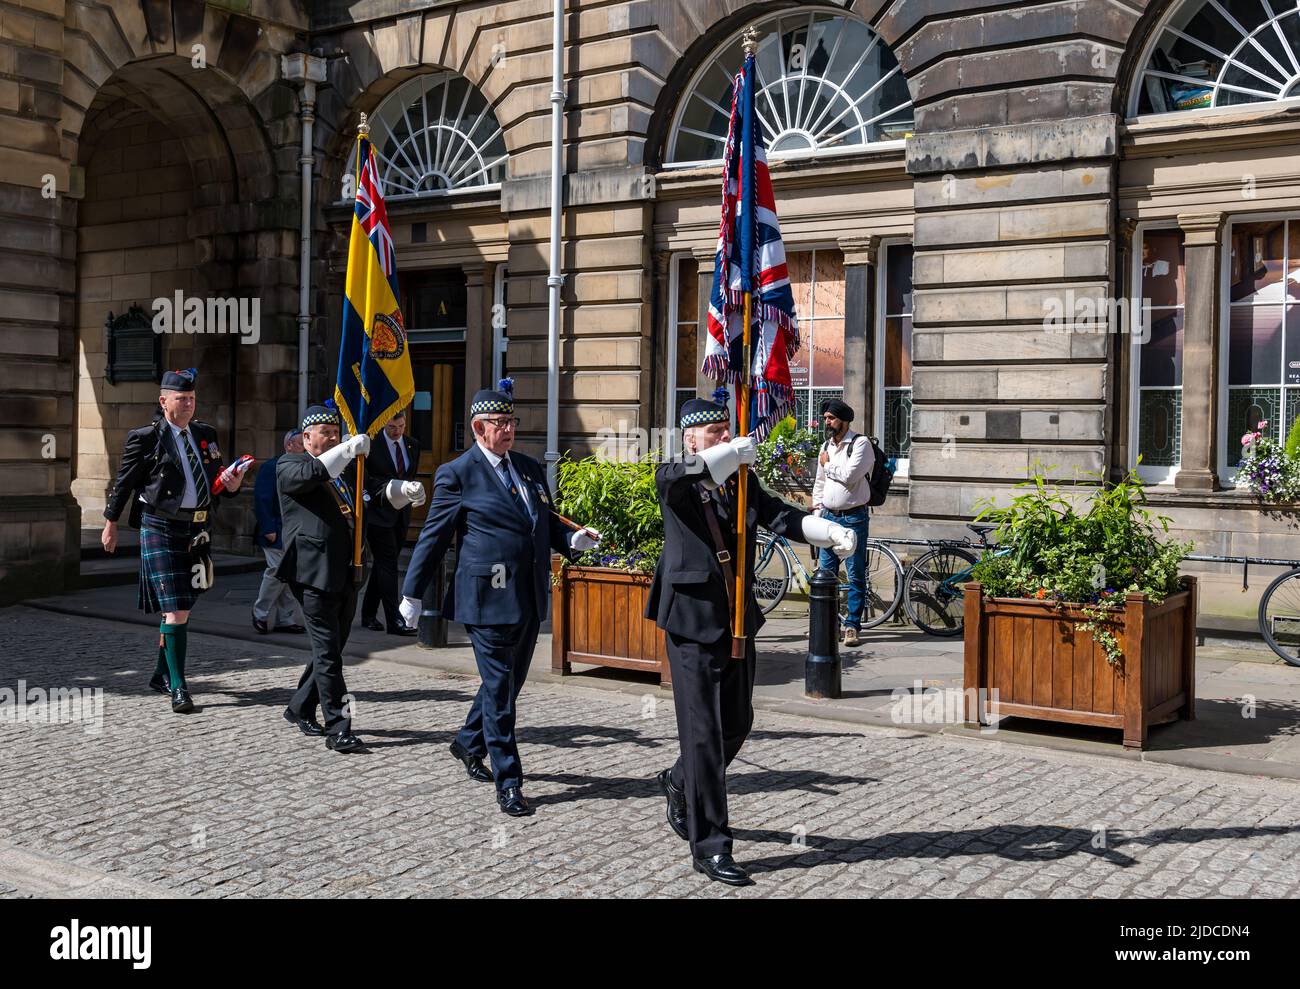 City Chambers, Edinburgh, Scotland, United Kingdom, 20 June 2022. Armed Forces flag raising ceremony: A procession with Armed Forces Day flag at City Chambers with a Parade Marshall, standard bearers & Eddie Maley carrying the flag plus guests Lt Cdr Will McLeman (Royal Navy) Garrison Commander Lt Col Lorne Campbell (British Army) & Squadron Leader Derek Read (Royal Air Force). The Flag Raising Ceremony is a national event to honour Armed Forces personnel Stock Photo